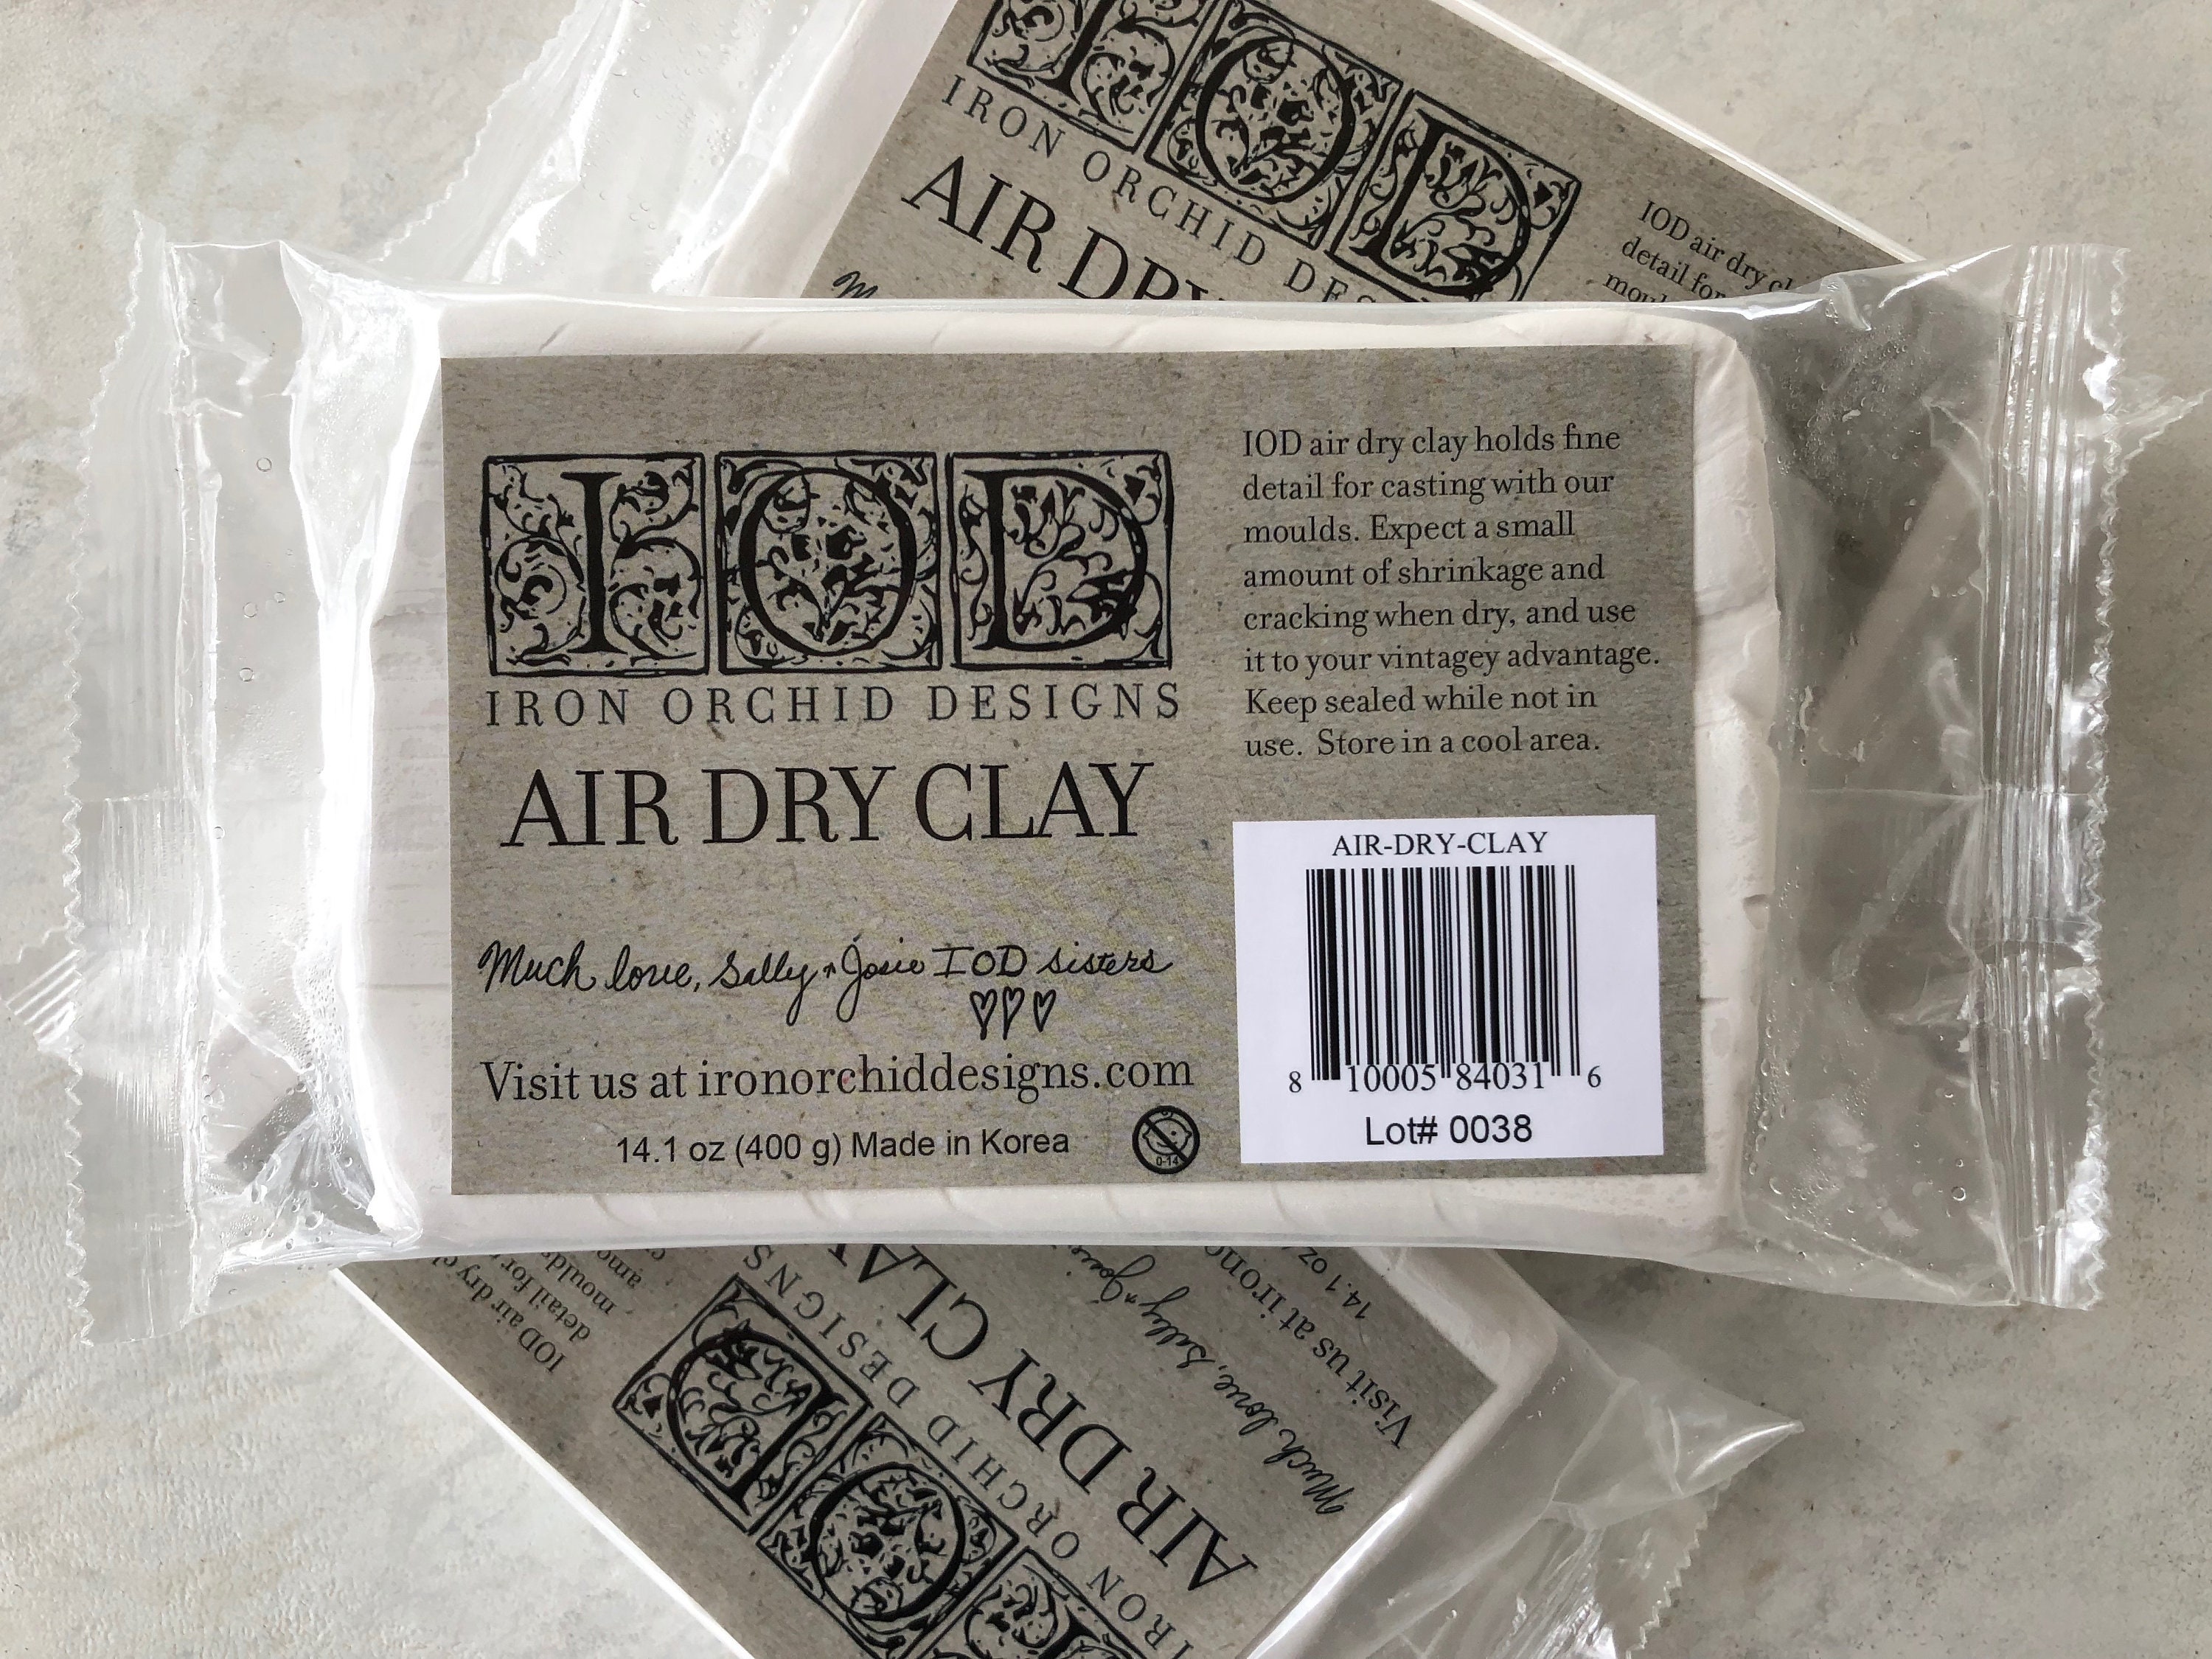 IOD Air Dry Clay for moulds, molds, perfect for crafts